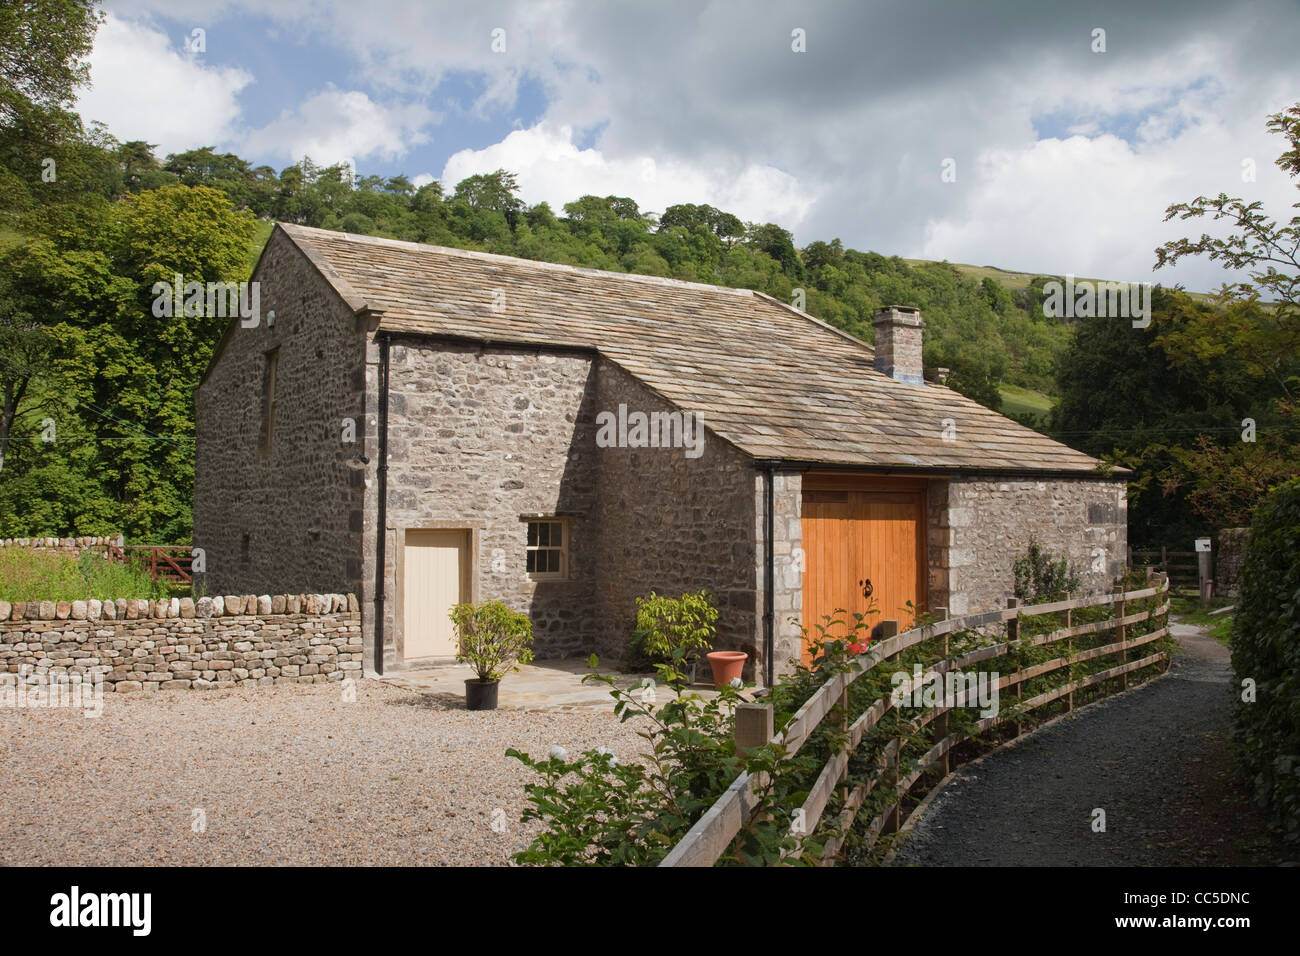 Die alte Remise Umwandlung in Arncliffe in Littondale, The Yorkshire Dales. Stockfoto